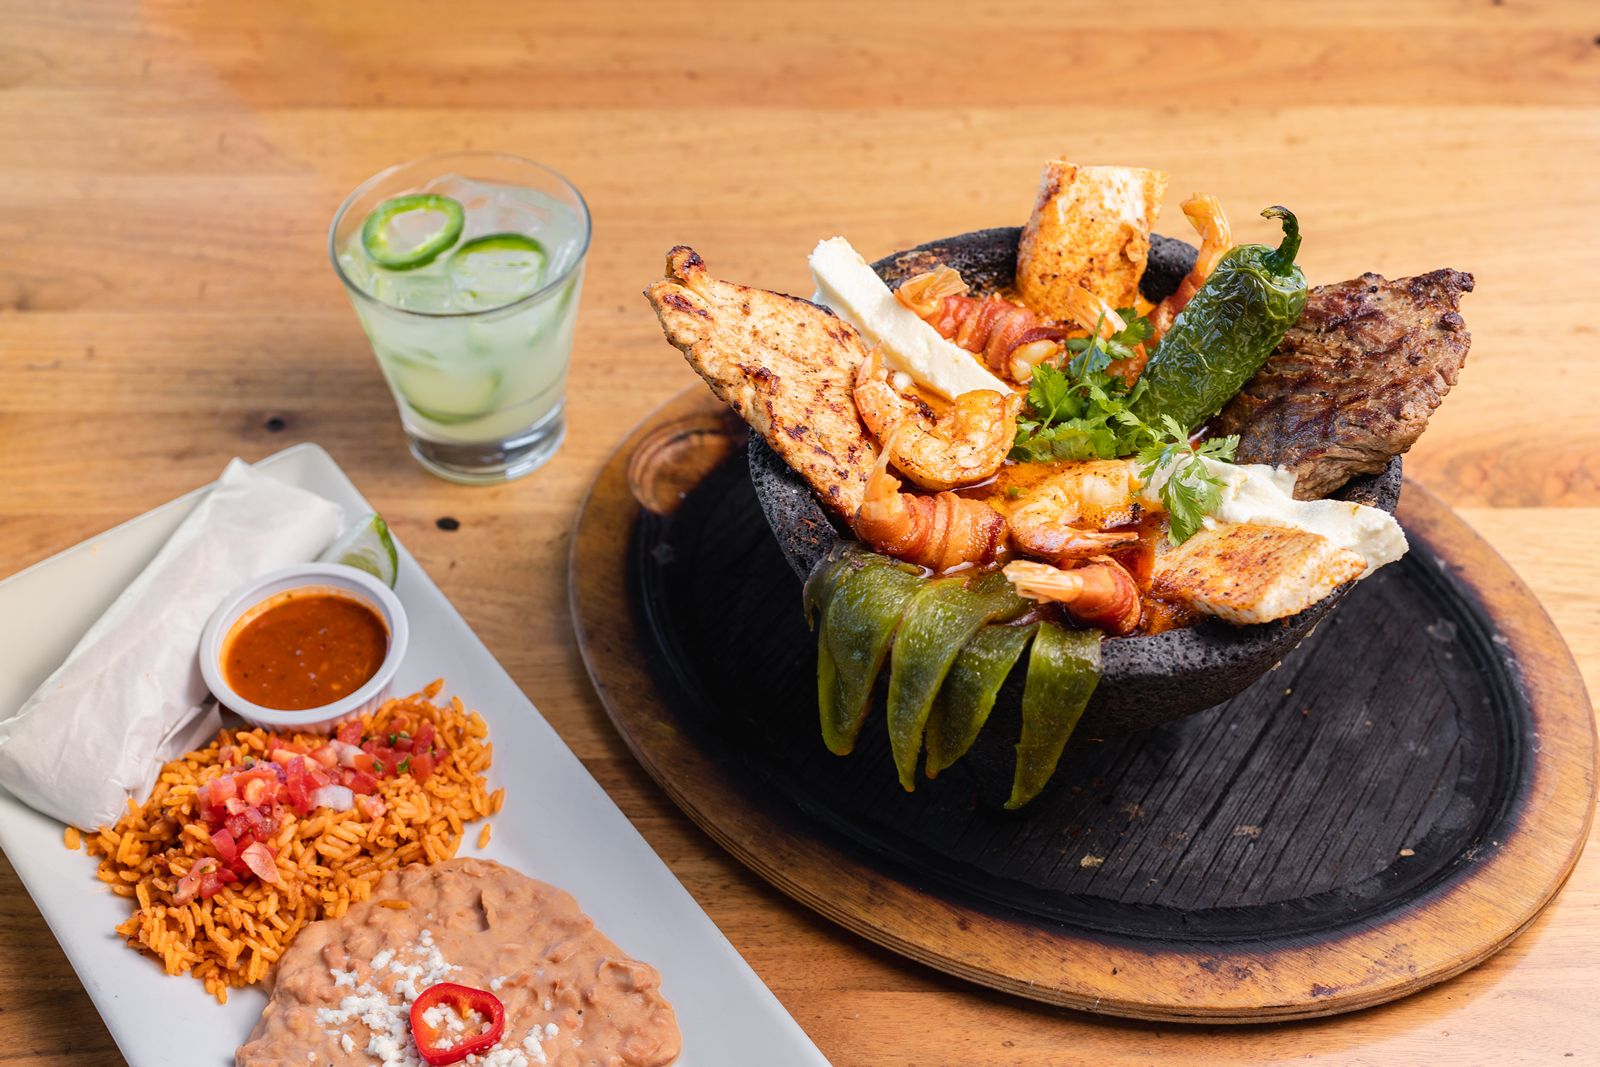 GuacAmigos Tequila & Tacos Releases Limited Time Menu With New Flavors of the Summer